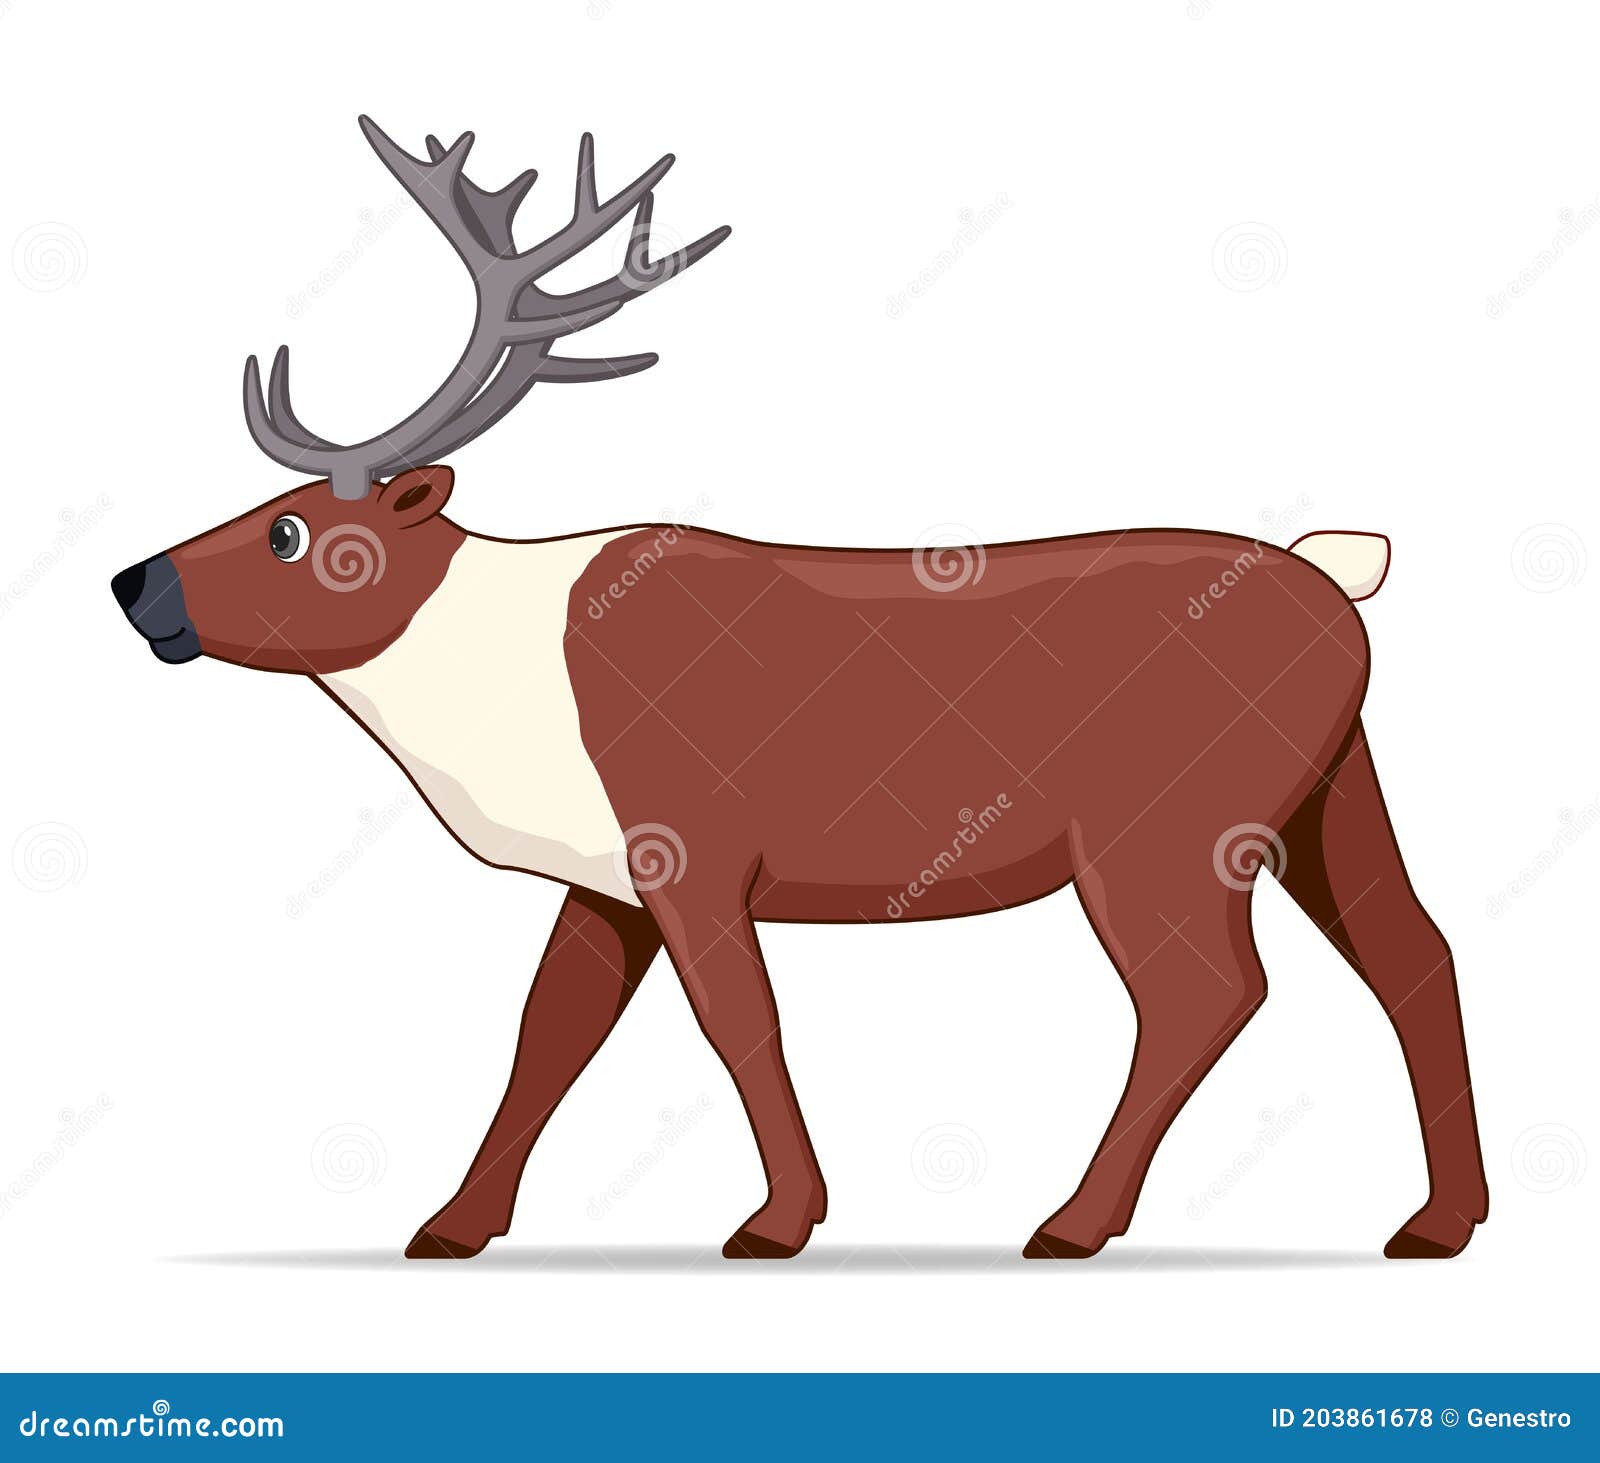 Caribou Animal Standing on a White Background Stock Vector - Illustration  of friendly, cartoon: 203861678